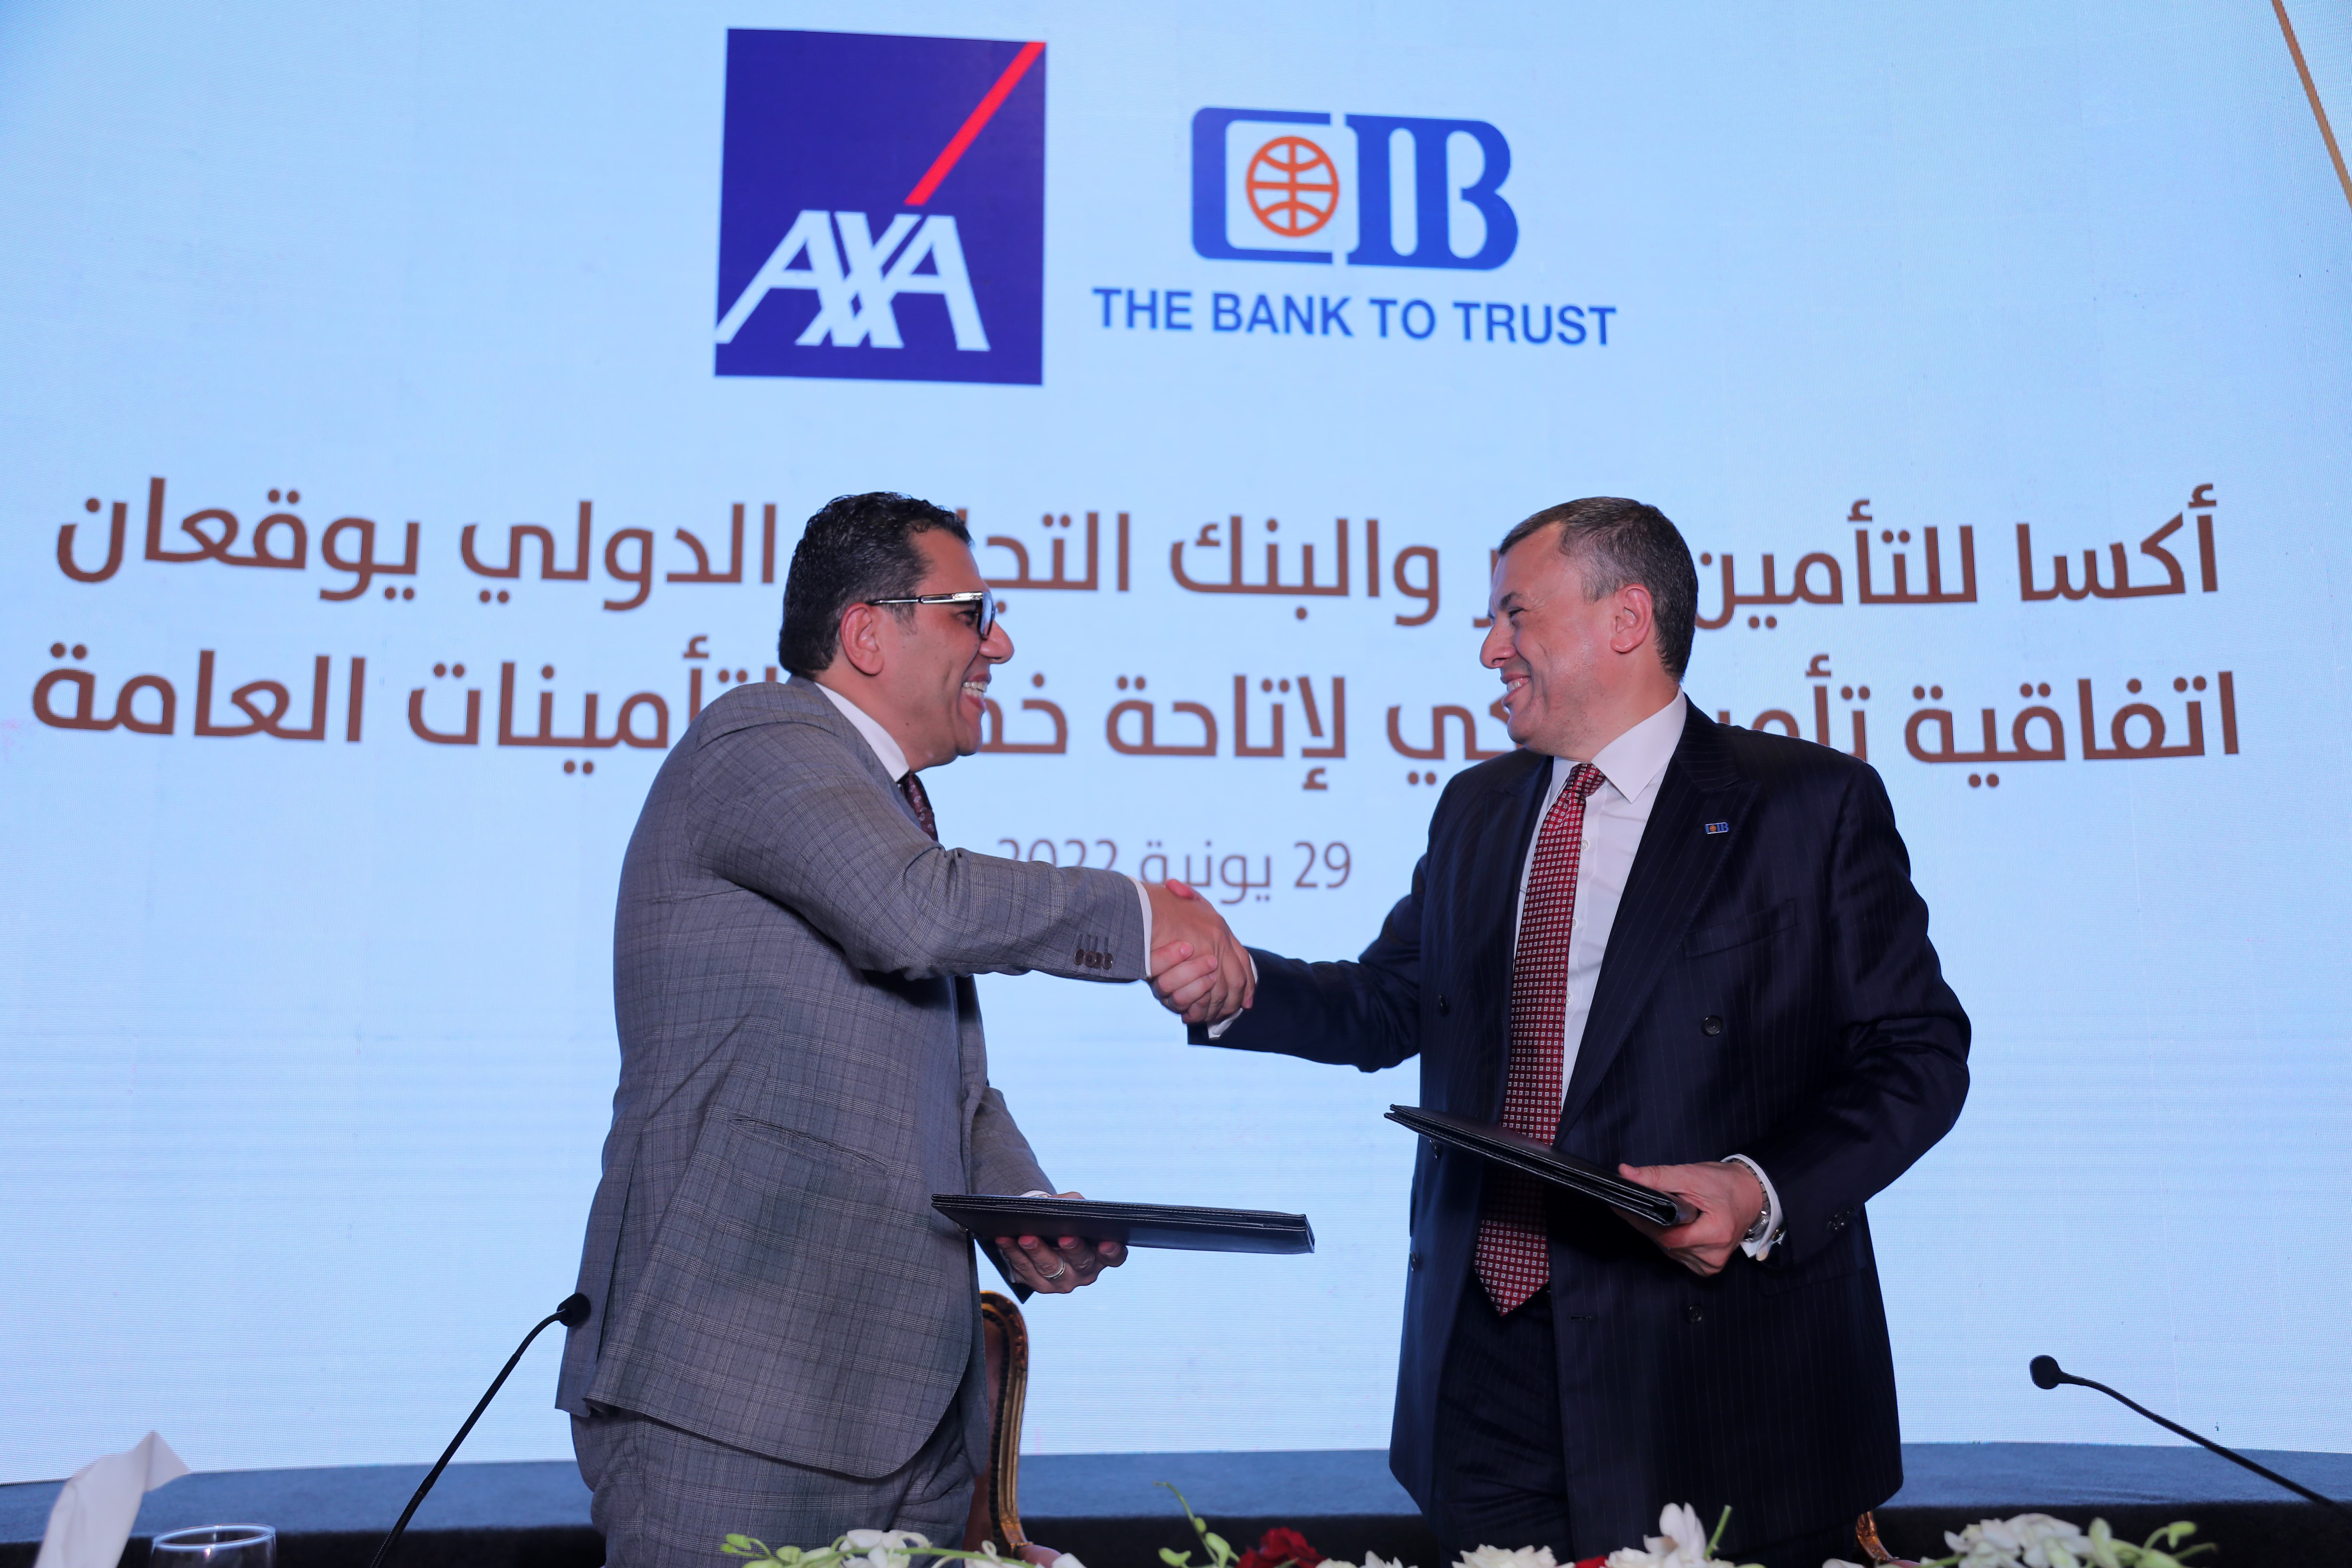 AXA Egypt and Commercial International Bank (CIB), Egypt’s leading private sector bank, signed a five-year bancassurance agreement